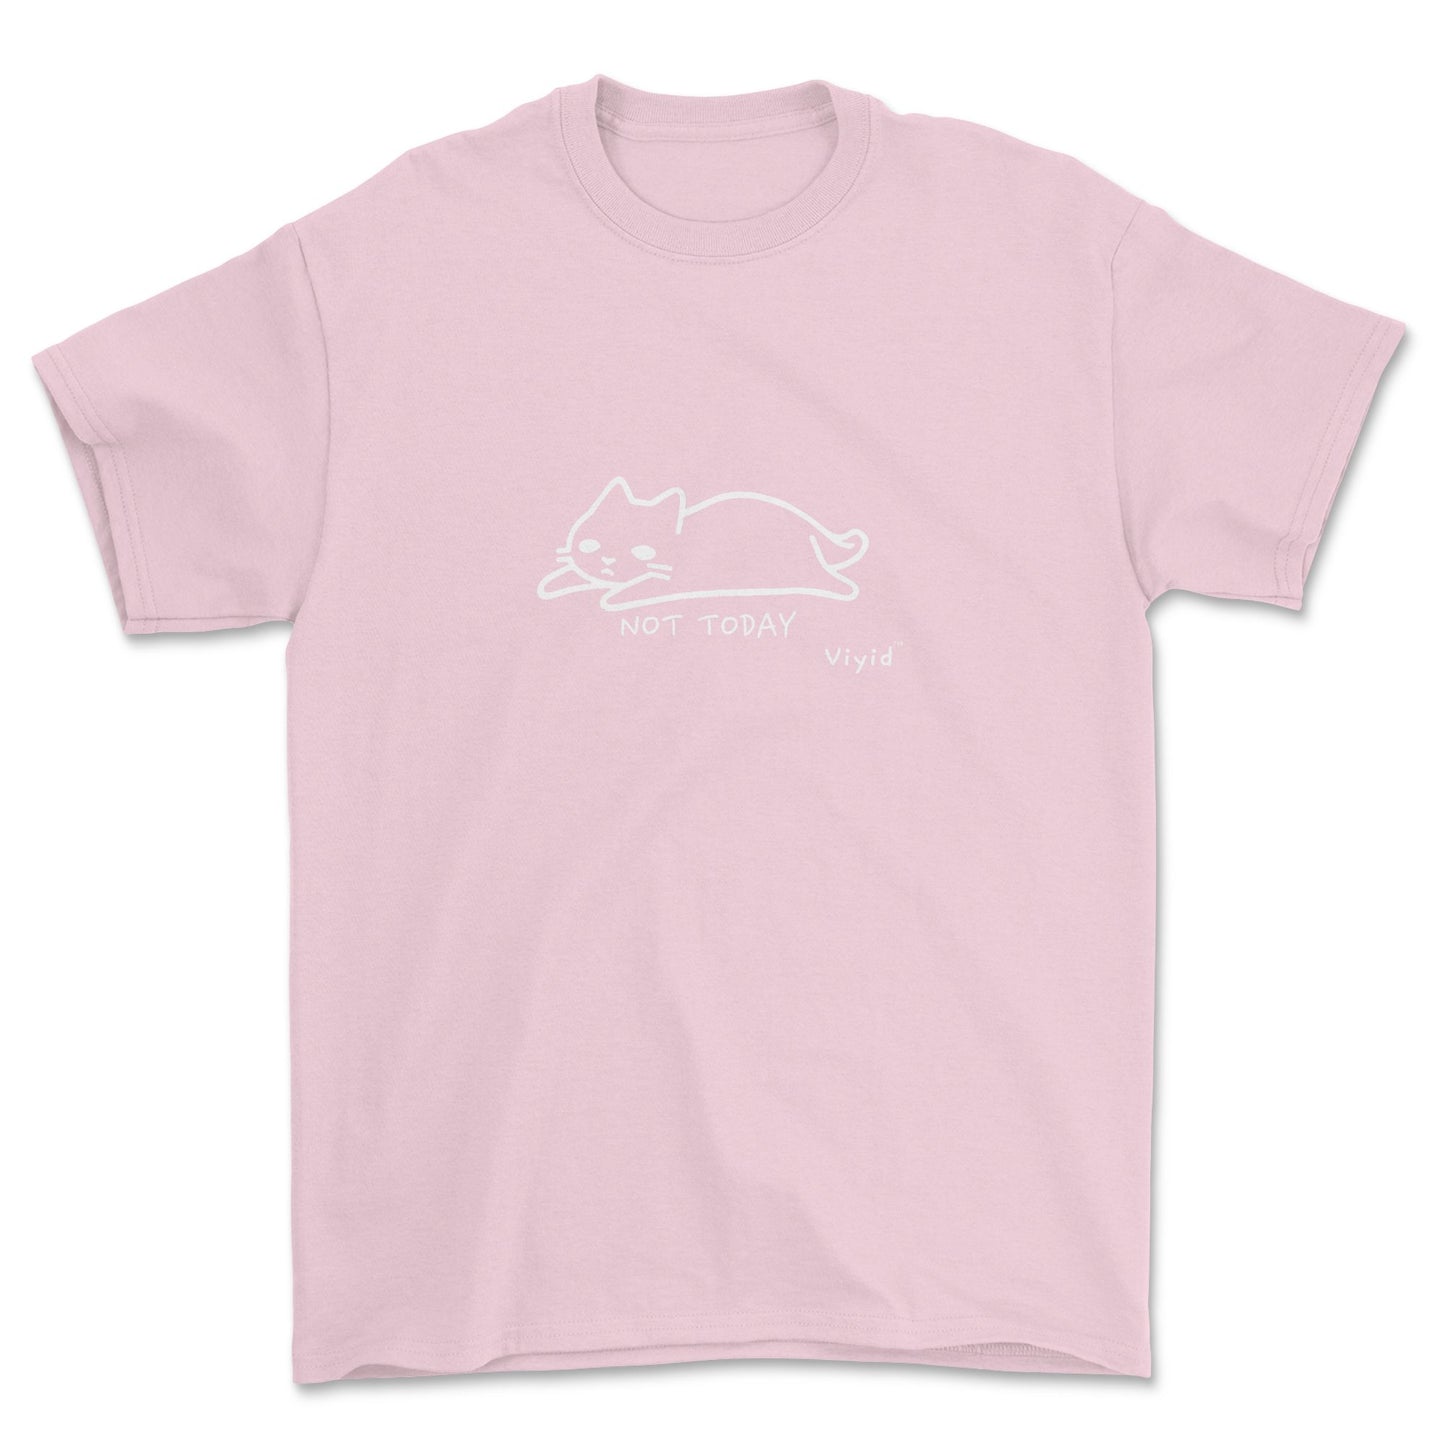 cat doodle not today youth t-shirt light pink